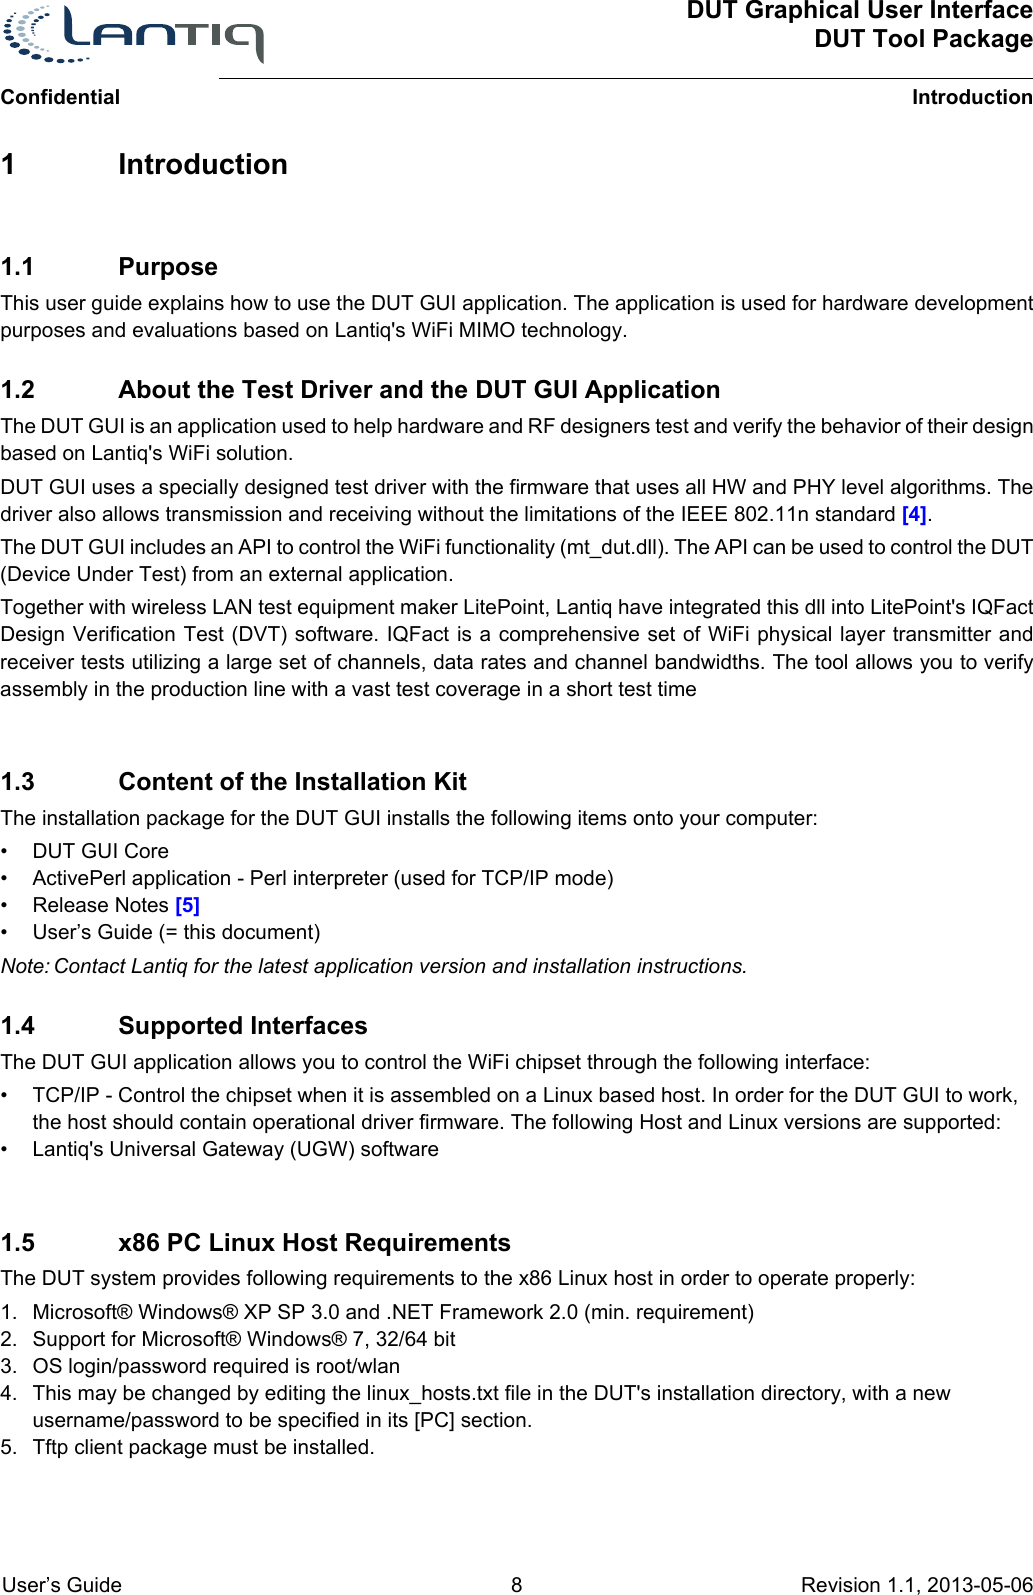 ConfidentialDUT Graphical User InterfaceDUT Tool PackageIntroduction User’s Guide 8 Revision 1.1, 2013-05-06      1 Introduction1.1 PurposeThis user guide explains how to use the DUT GUI application. The application is used for hardware development purposes and evaluations based on Lantiq&apos;s WiFi MIMO technology.1.2 About the Test Driver and the DUT GUI ApplicationThe DUT GUI is an application used to help hardware and RF designers test and verify the behavior of their design based on Lantiq&apos;s WiFi solution.DUT GUI uses a specially designed test driver with the firmware that uses all HW and PHY level algorithms. The driver also allows transmission and receiving without the limitations of the IEEE 802.11n standard [4].The DUT GUI includes an API to control the WiFi functionality (mt_dut.dll). The API can be used to control the DUT (Device Under Test) from an external application.Together with wireless LAN test equipment maker LitePoint, Lantiq have integrated this dll into LitePoint&apos;s IQFact Design Verification Test (DVT) software. IQFact is a comprehensive set of WiFi physical layer transmitter and receiver tests utilizing a large set of channels, data rates and channel bandwidths. The tool allows you to verify assembly in the production line with a vast test coverage in a short test time1.3 Content of the Installation KitThe installation package for the DUT GUI installs the following items onto your computer:• DUT GUI Core• ActivePerl application - Perl interpreter (used for TCP/IP mode)• Release Notes [5]• User’s Guide (= this document)Note: Contact Lantiq for the latest application version and installation instructions.1.4 Supported InterfacesThe DUT GUI application allows you to control the WiFi chipset through the following interface:• TCP/IP - Control the chipset when it is assembled on a Linux based host. In order for the DUT GUI to work, the host should contain operational driver firmware. The following Host and Linux versions are supported:• Lantiq&apos;s Universal Gateway (UGW) software1.5 x86 PC Linux Host RequirementsThe DUT system provides following requirements to the x86 Linux host in order to operate properly:1. Microsoft® Windows® XP SP 3.0 and .NET Framework 2.0 (min. requirement)2. Support for Microsoft® Windows® 7, 32/64 bit3. OS login/password required is root/wlan4. This may be changed by editing the linux_hosts.txt file in the DUT&apos;s installation directory, with a new username/password to be specified in its [PC] section.5. Tftp client package must be installed.